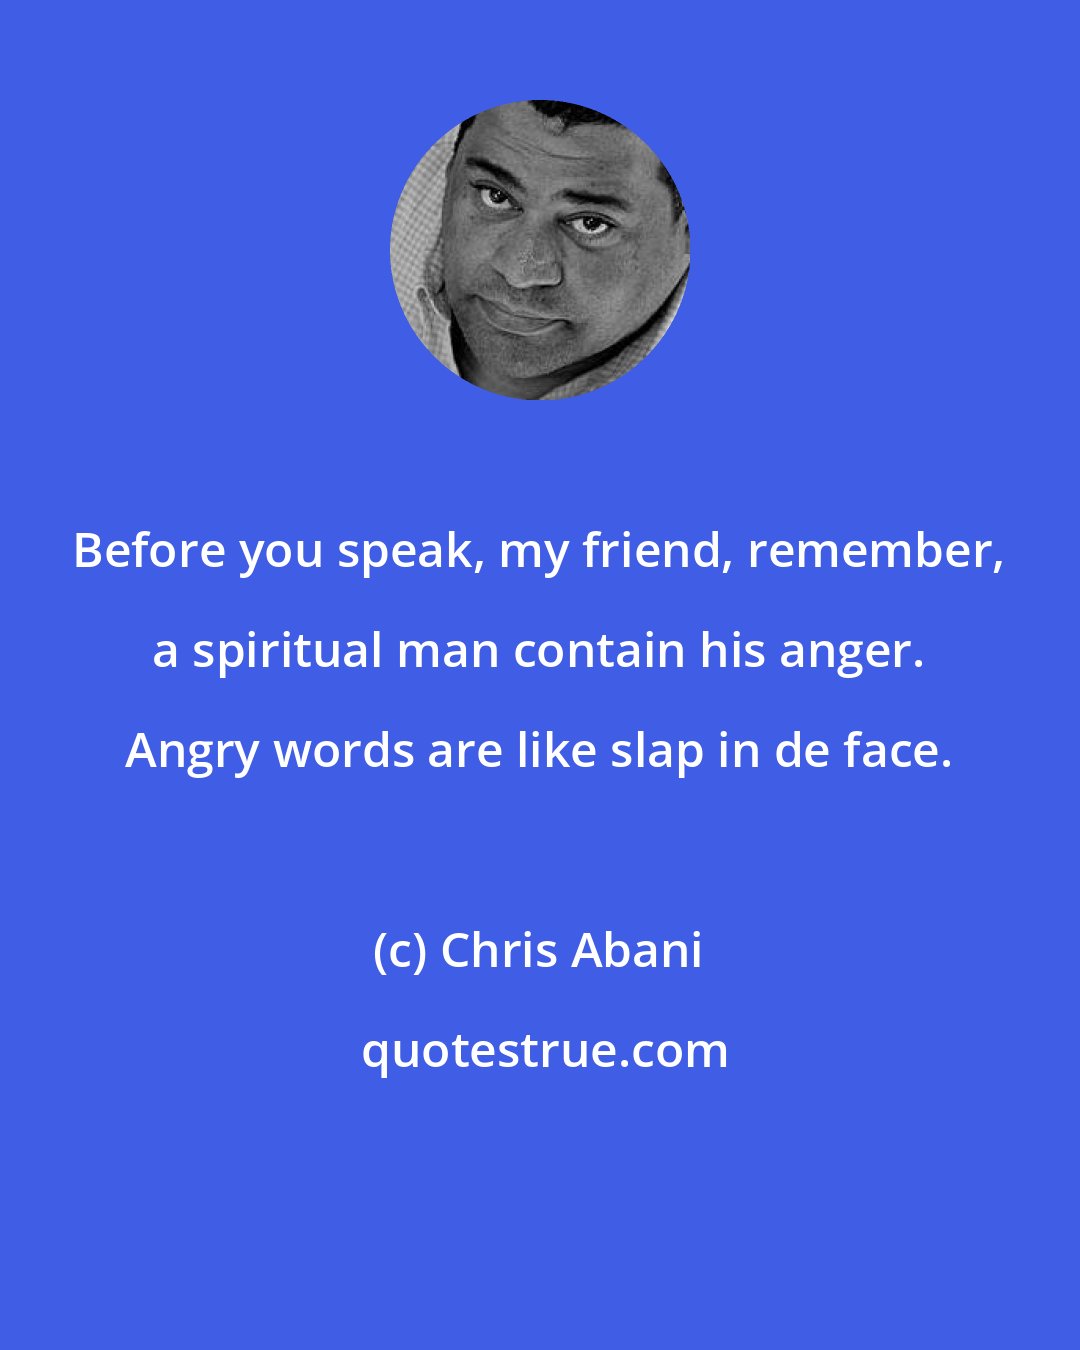 Chris Abani: Before you speak, my friend, remember, a spiritual man contain his anger. Angry words are like slap in de face.